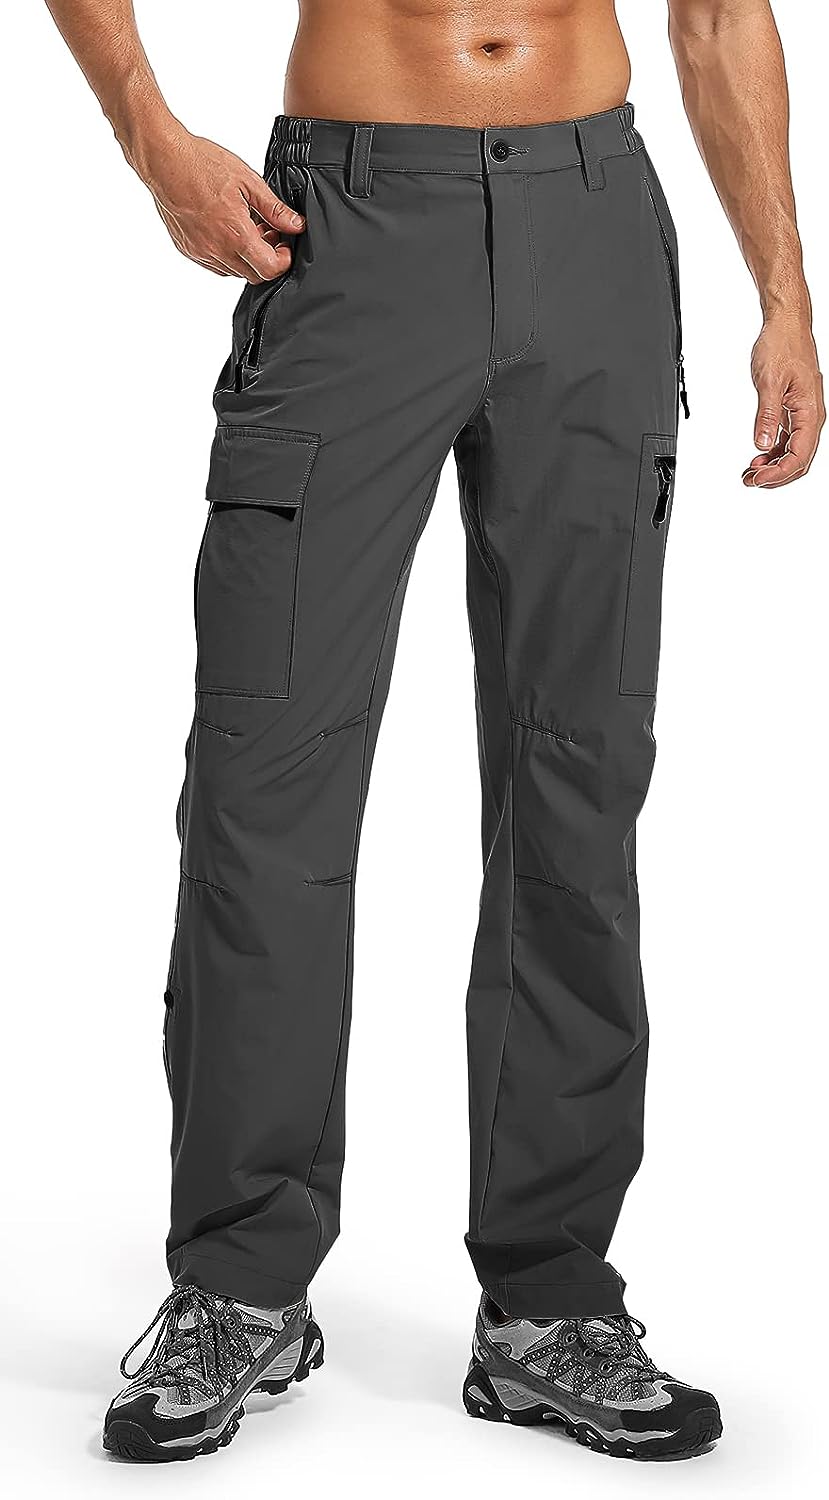 Men's Hiking Cargo Pants - Lightweight, Quick Dry, Waterproof for Tactical  Outdoor Hunting, Camping, Fishing